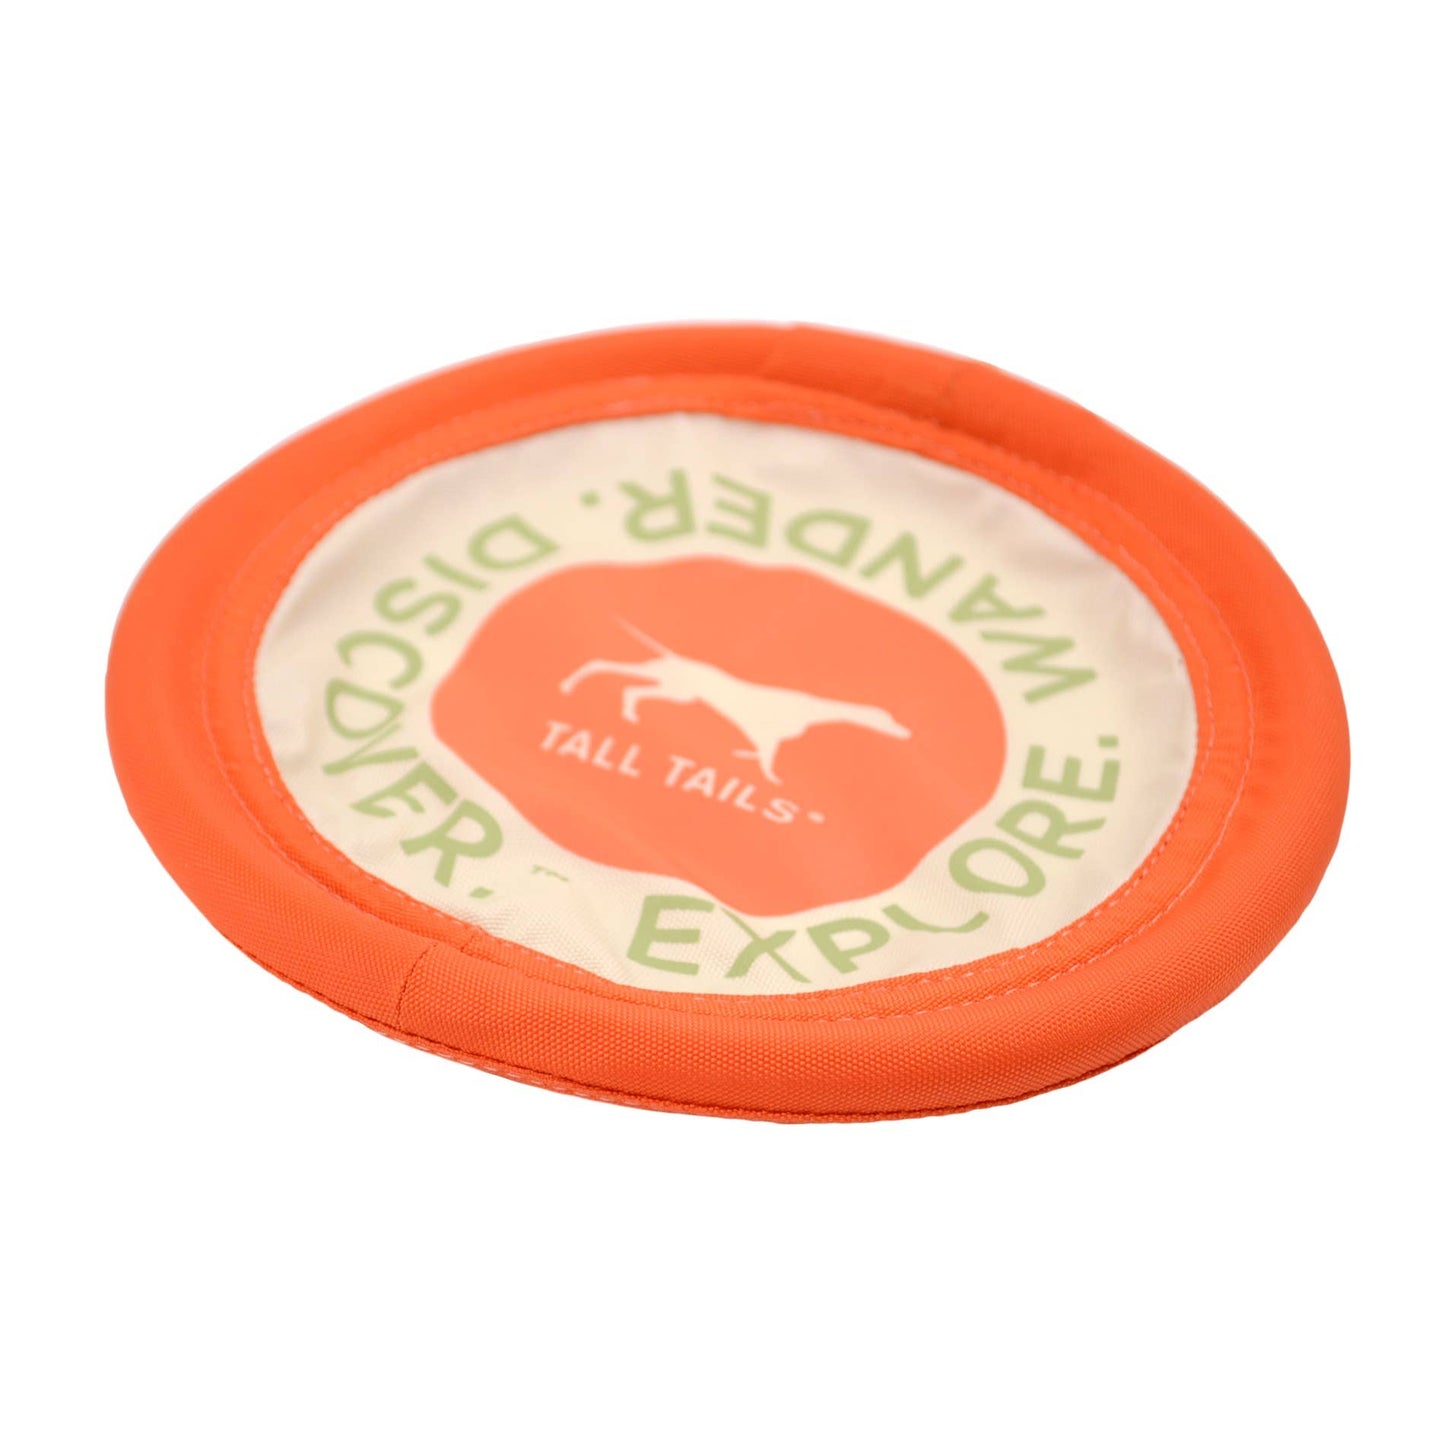 Tall Tails Flying Disc - 7"